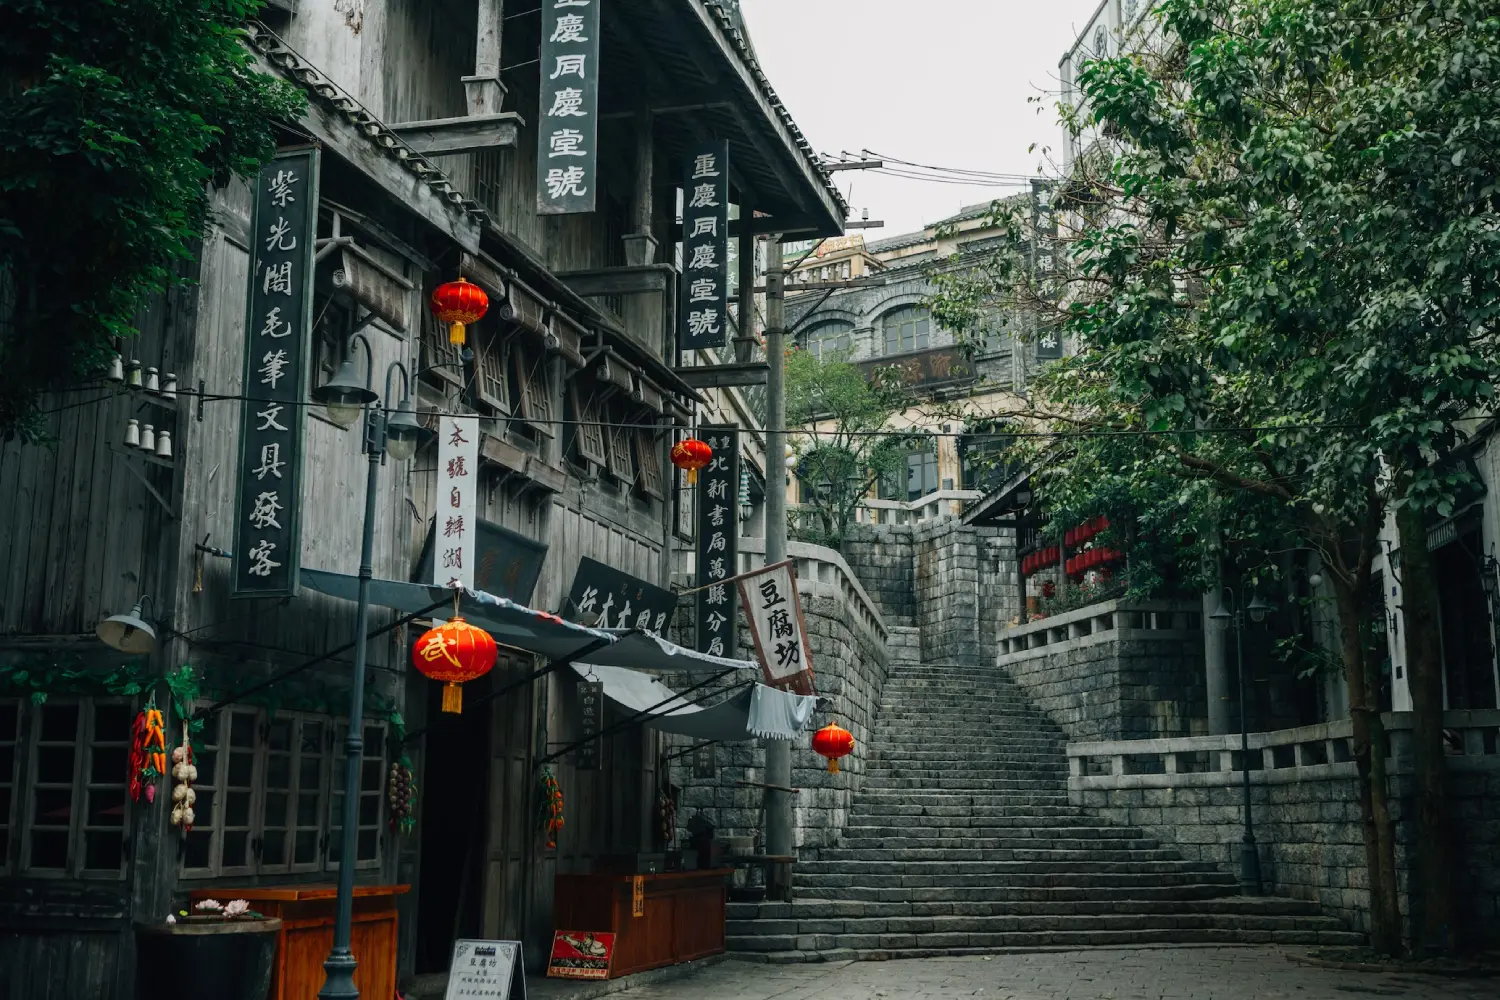 A street with stairs and buildings on the side.